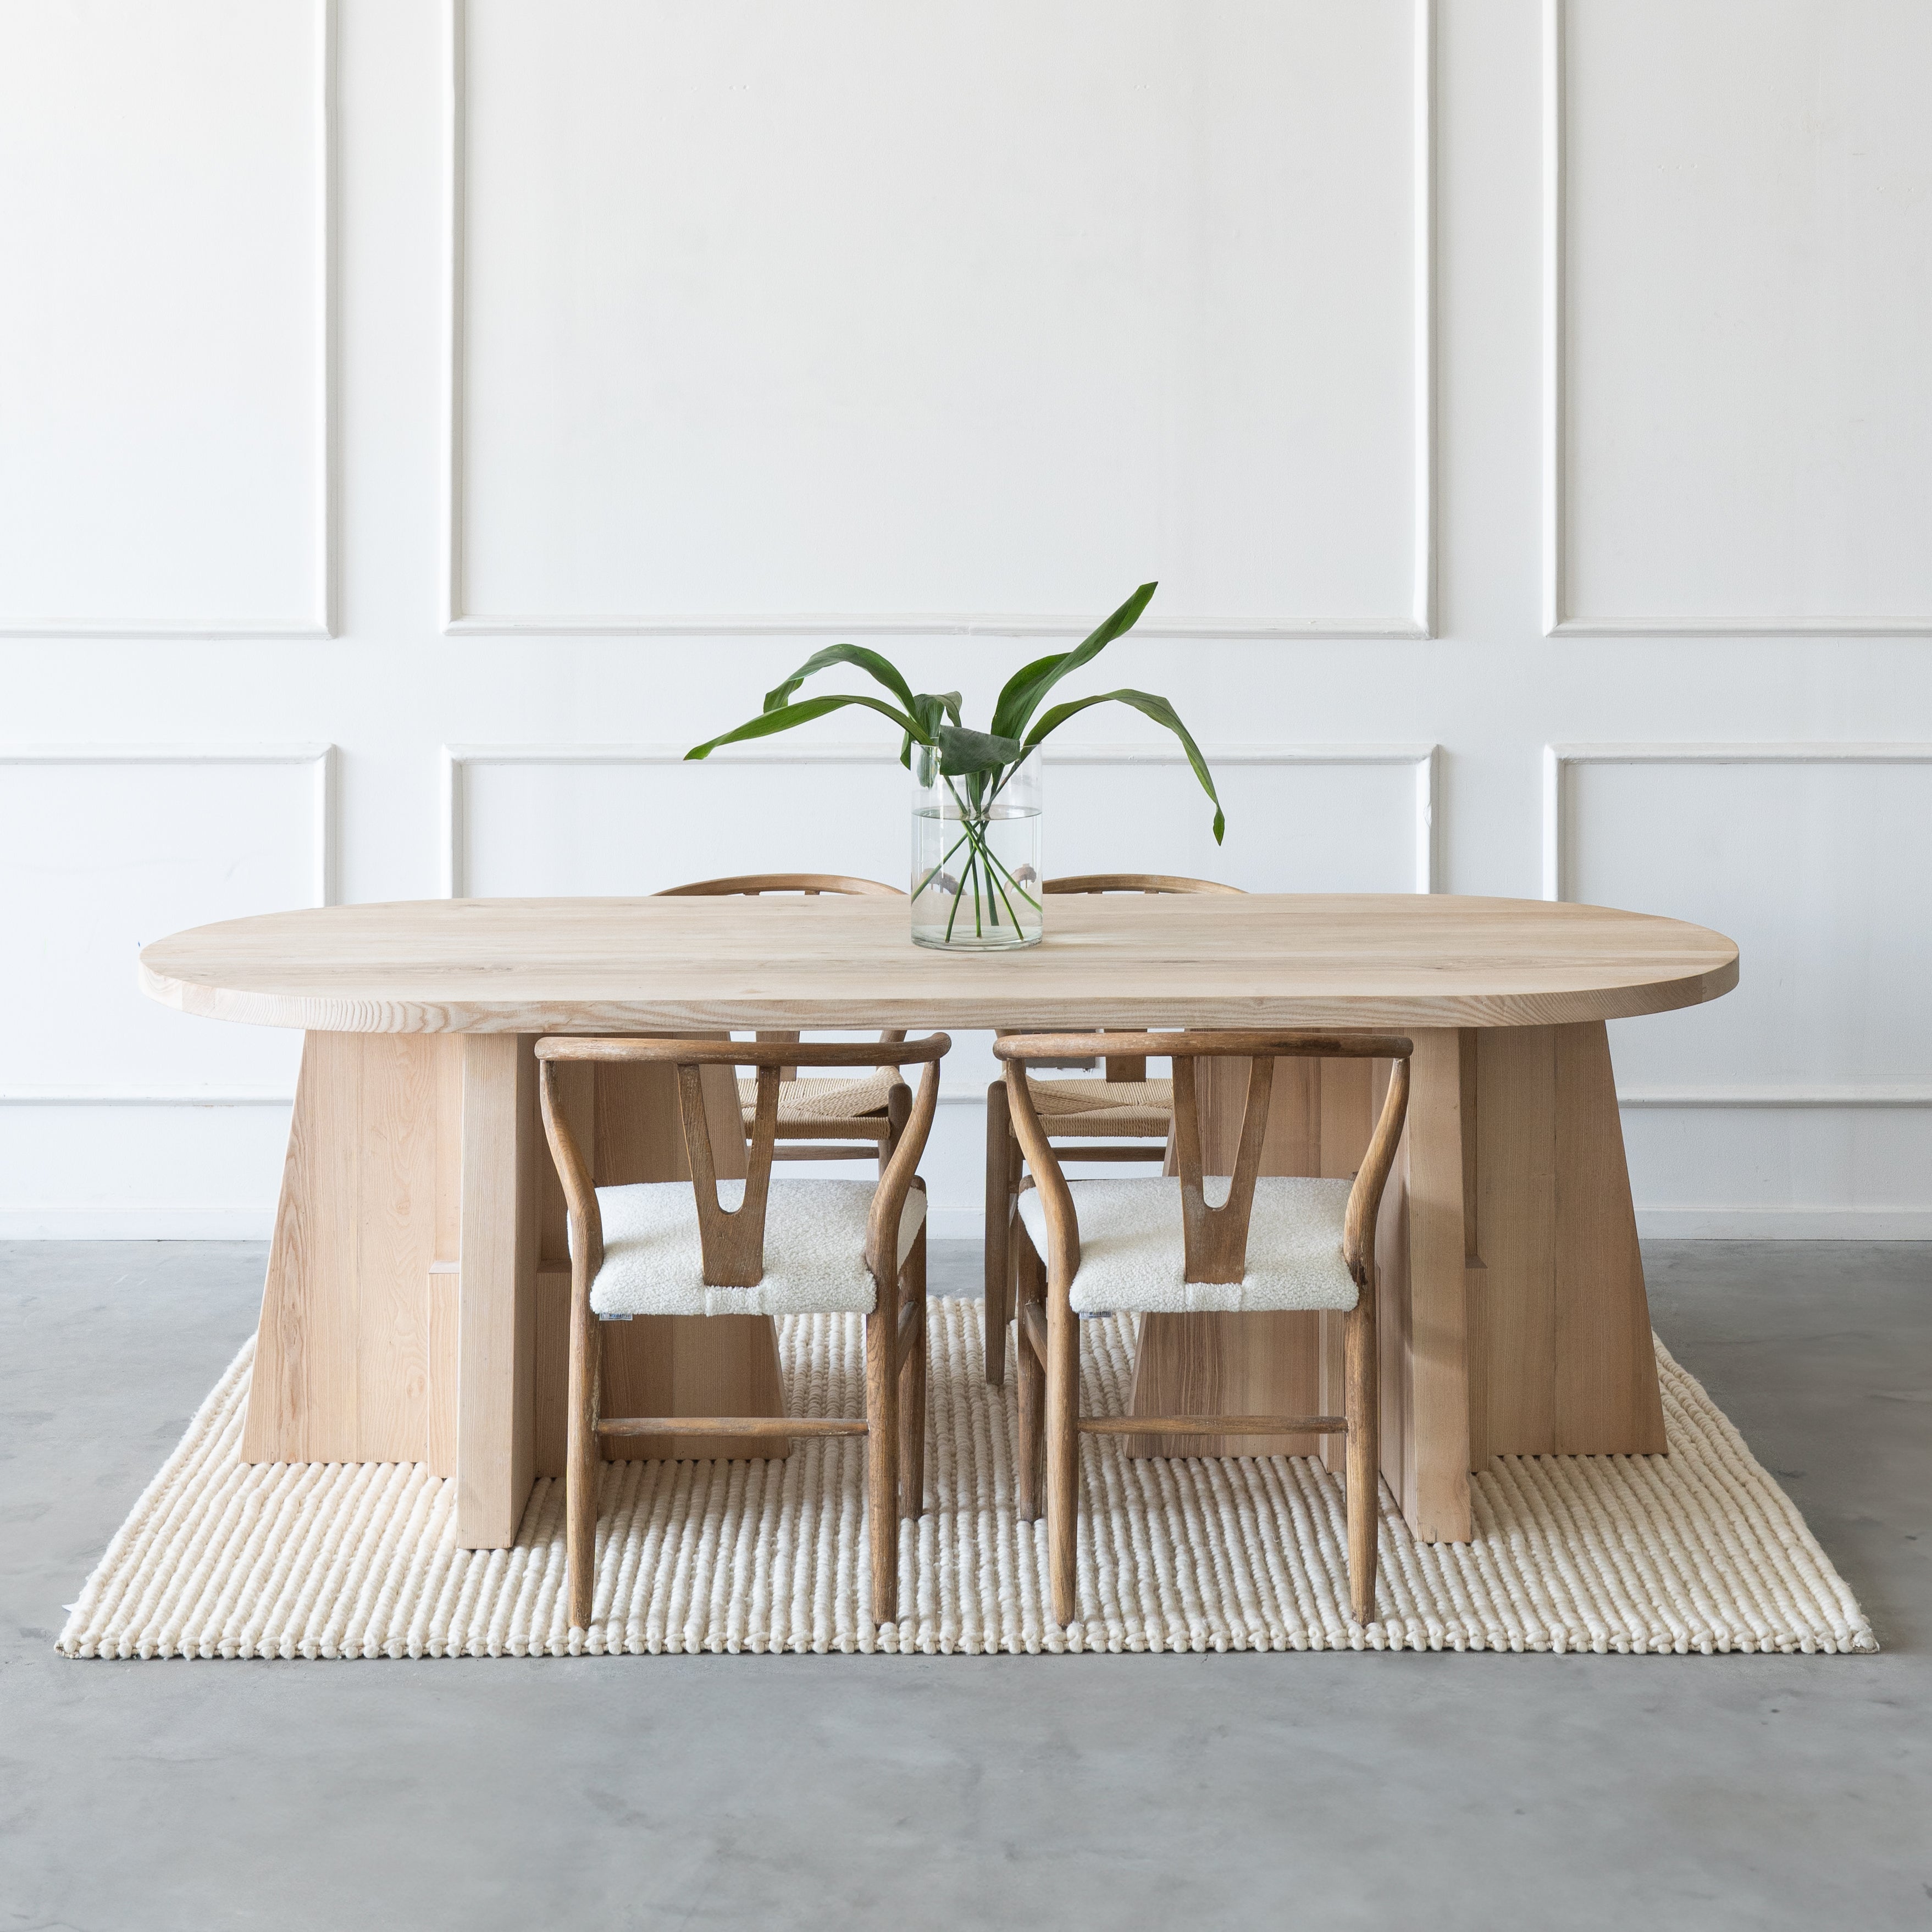 Lego Natural Solid Oak Wood Oval Dining Table  - WS Living - UAE - Dining Tables Wood and steel Furnitures - Dubai